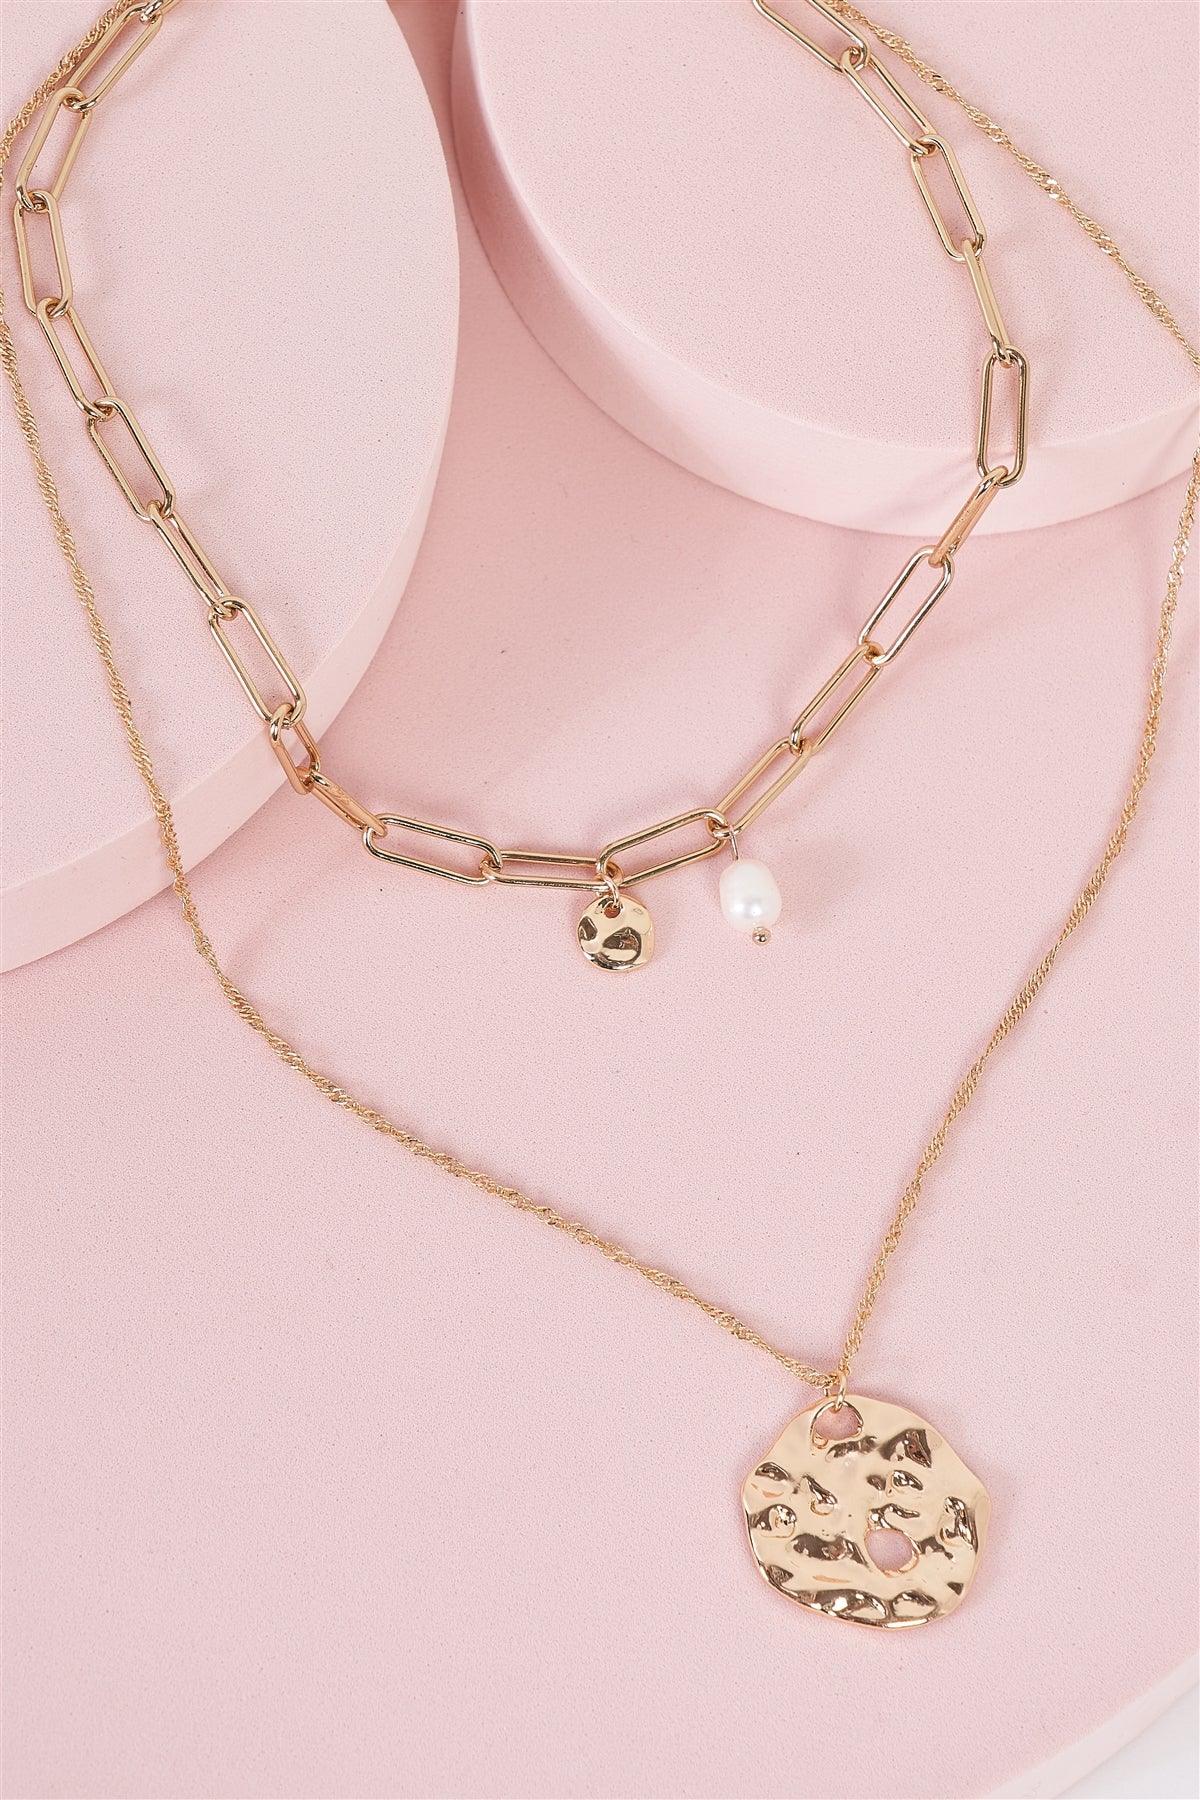 Gold Double Paperclip Chain And Twisted Chain Pearl And Medallion Pendant Necklace /3 Pieces